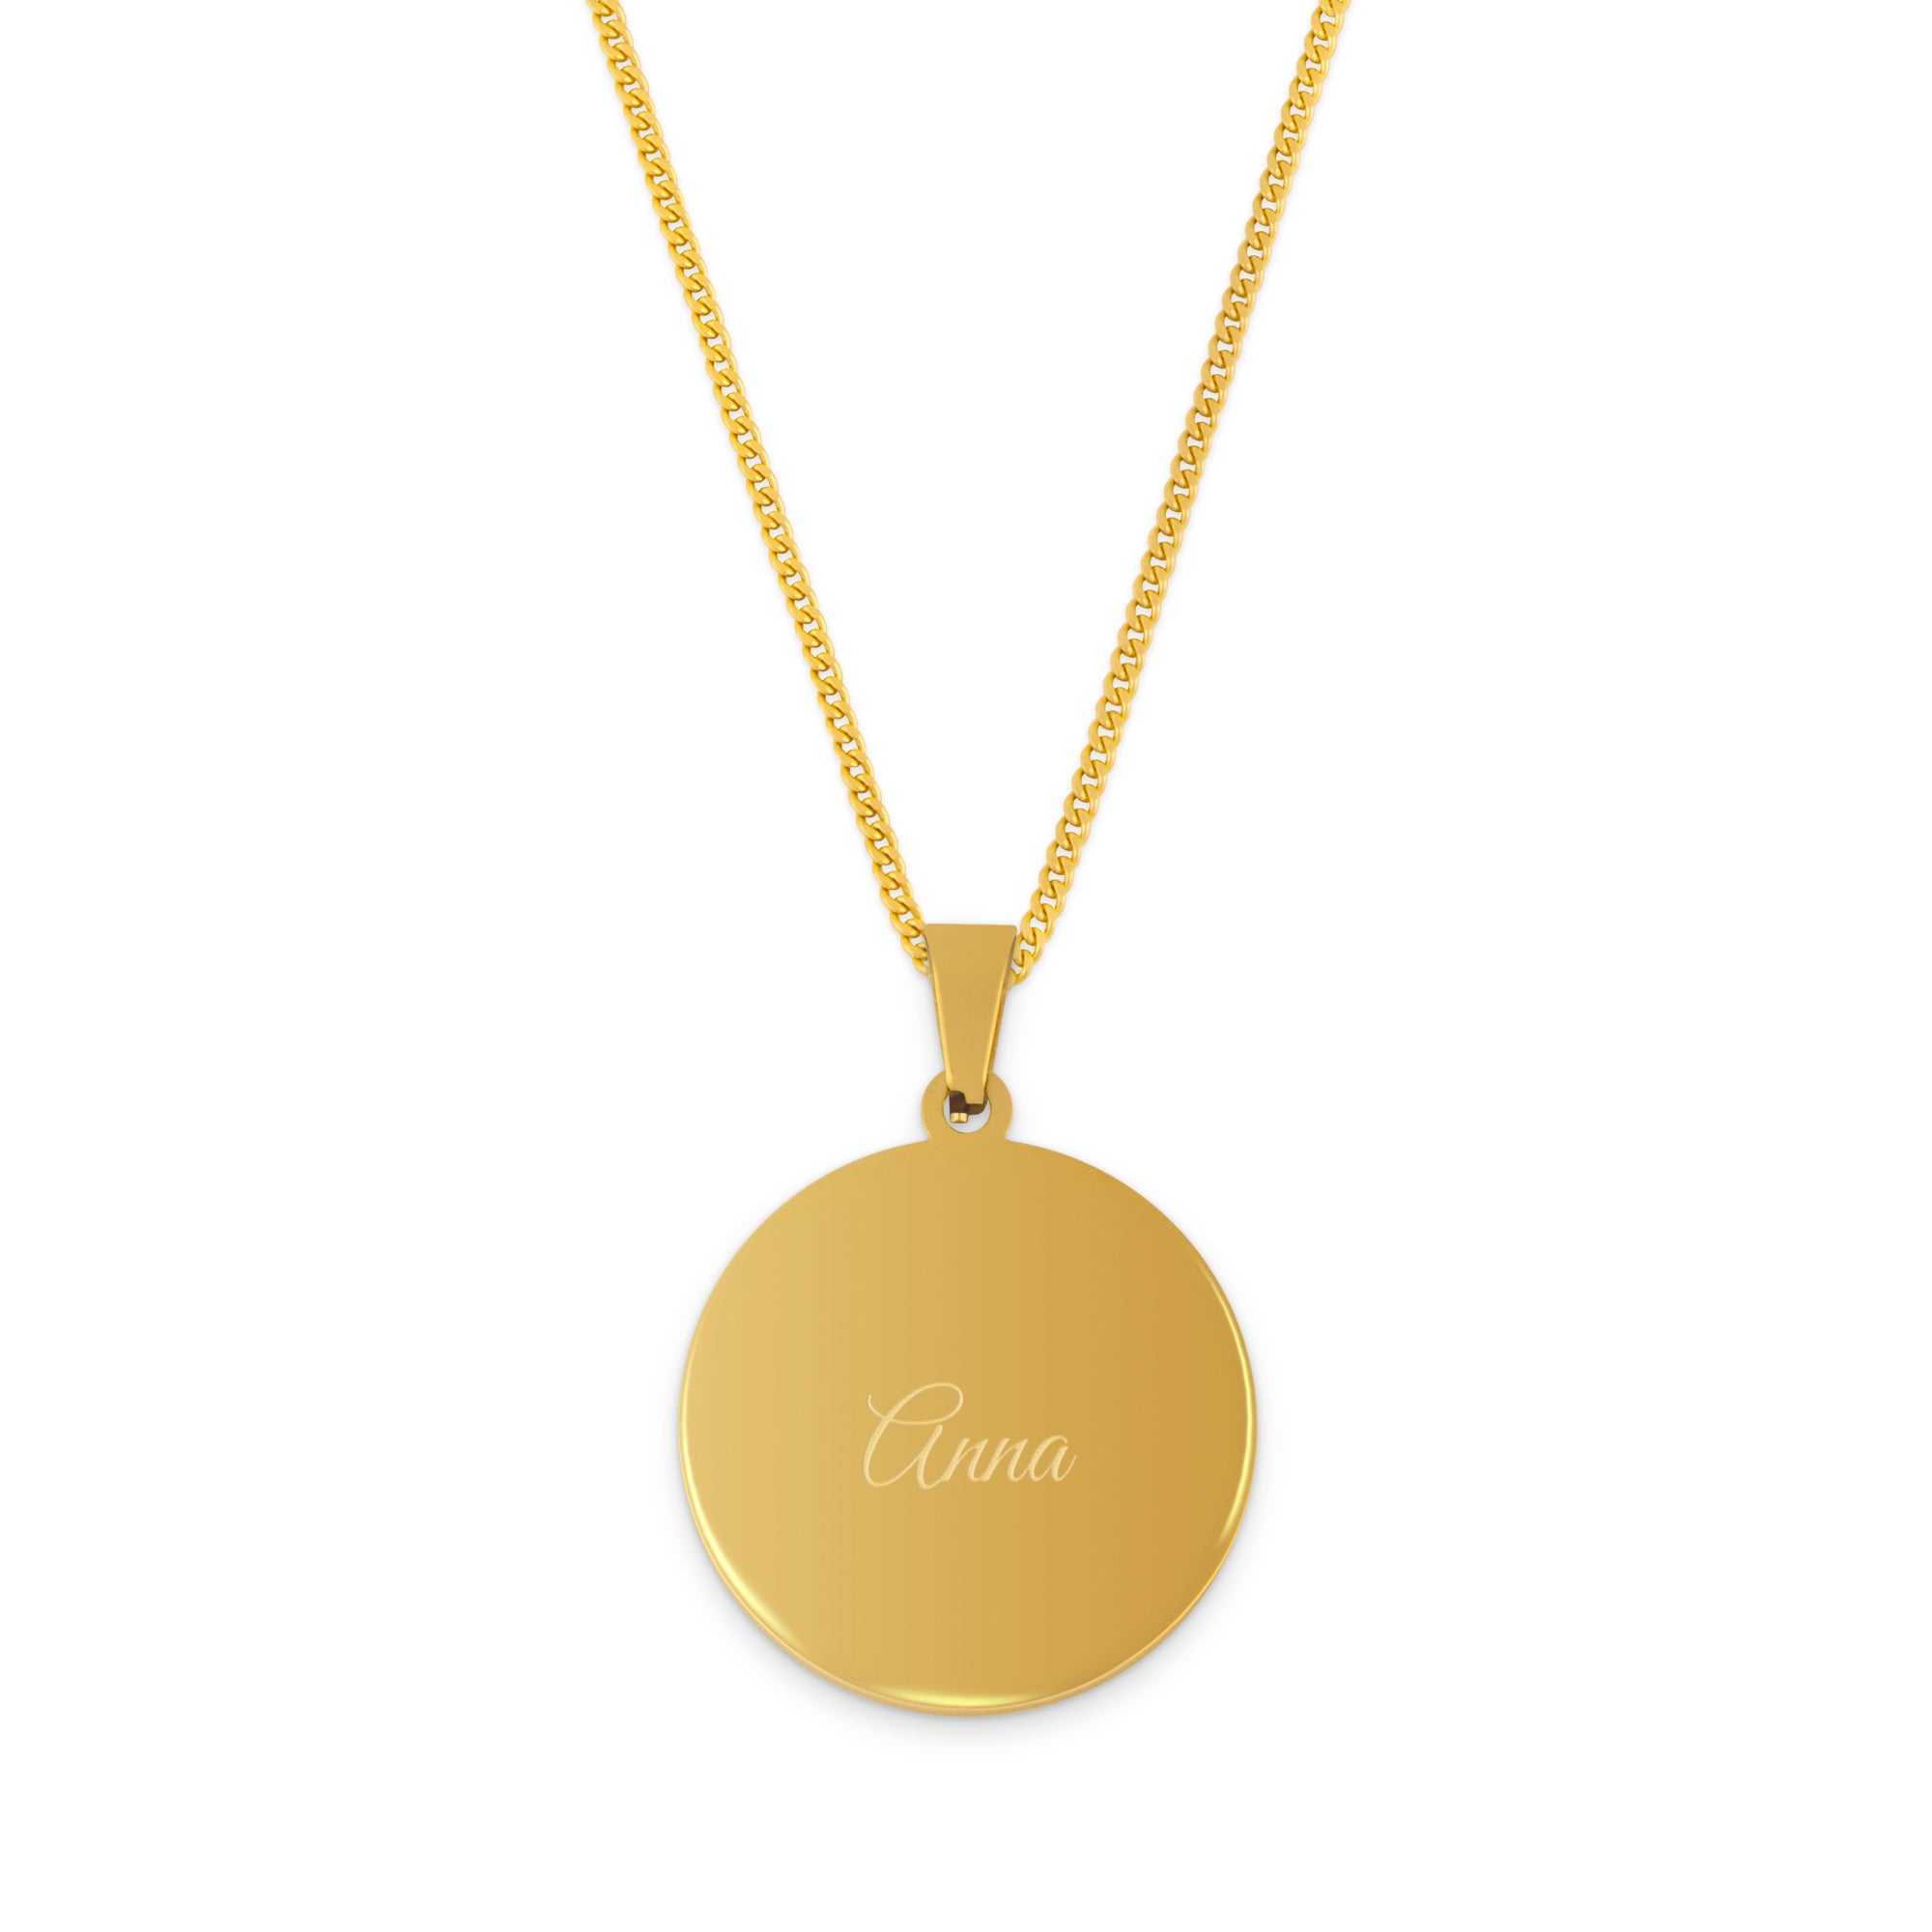 Necklace round pendant with text - Gold